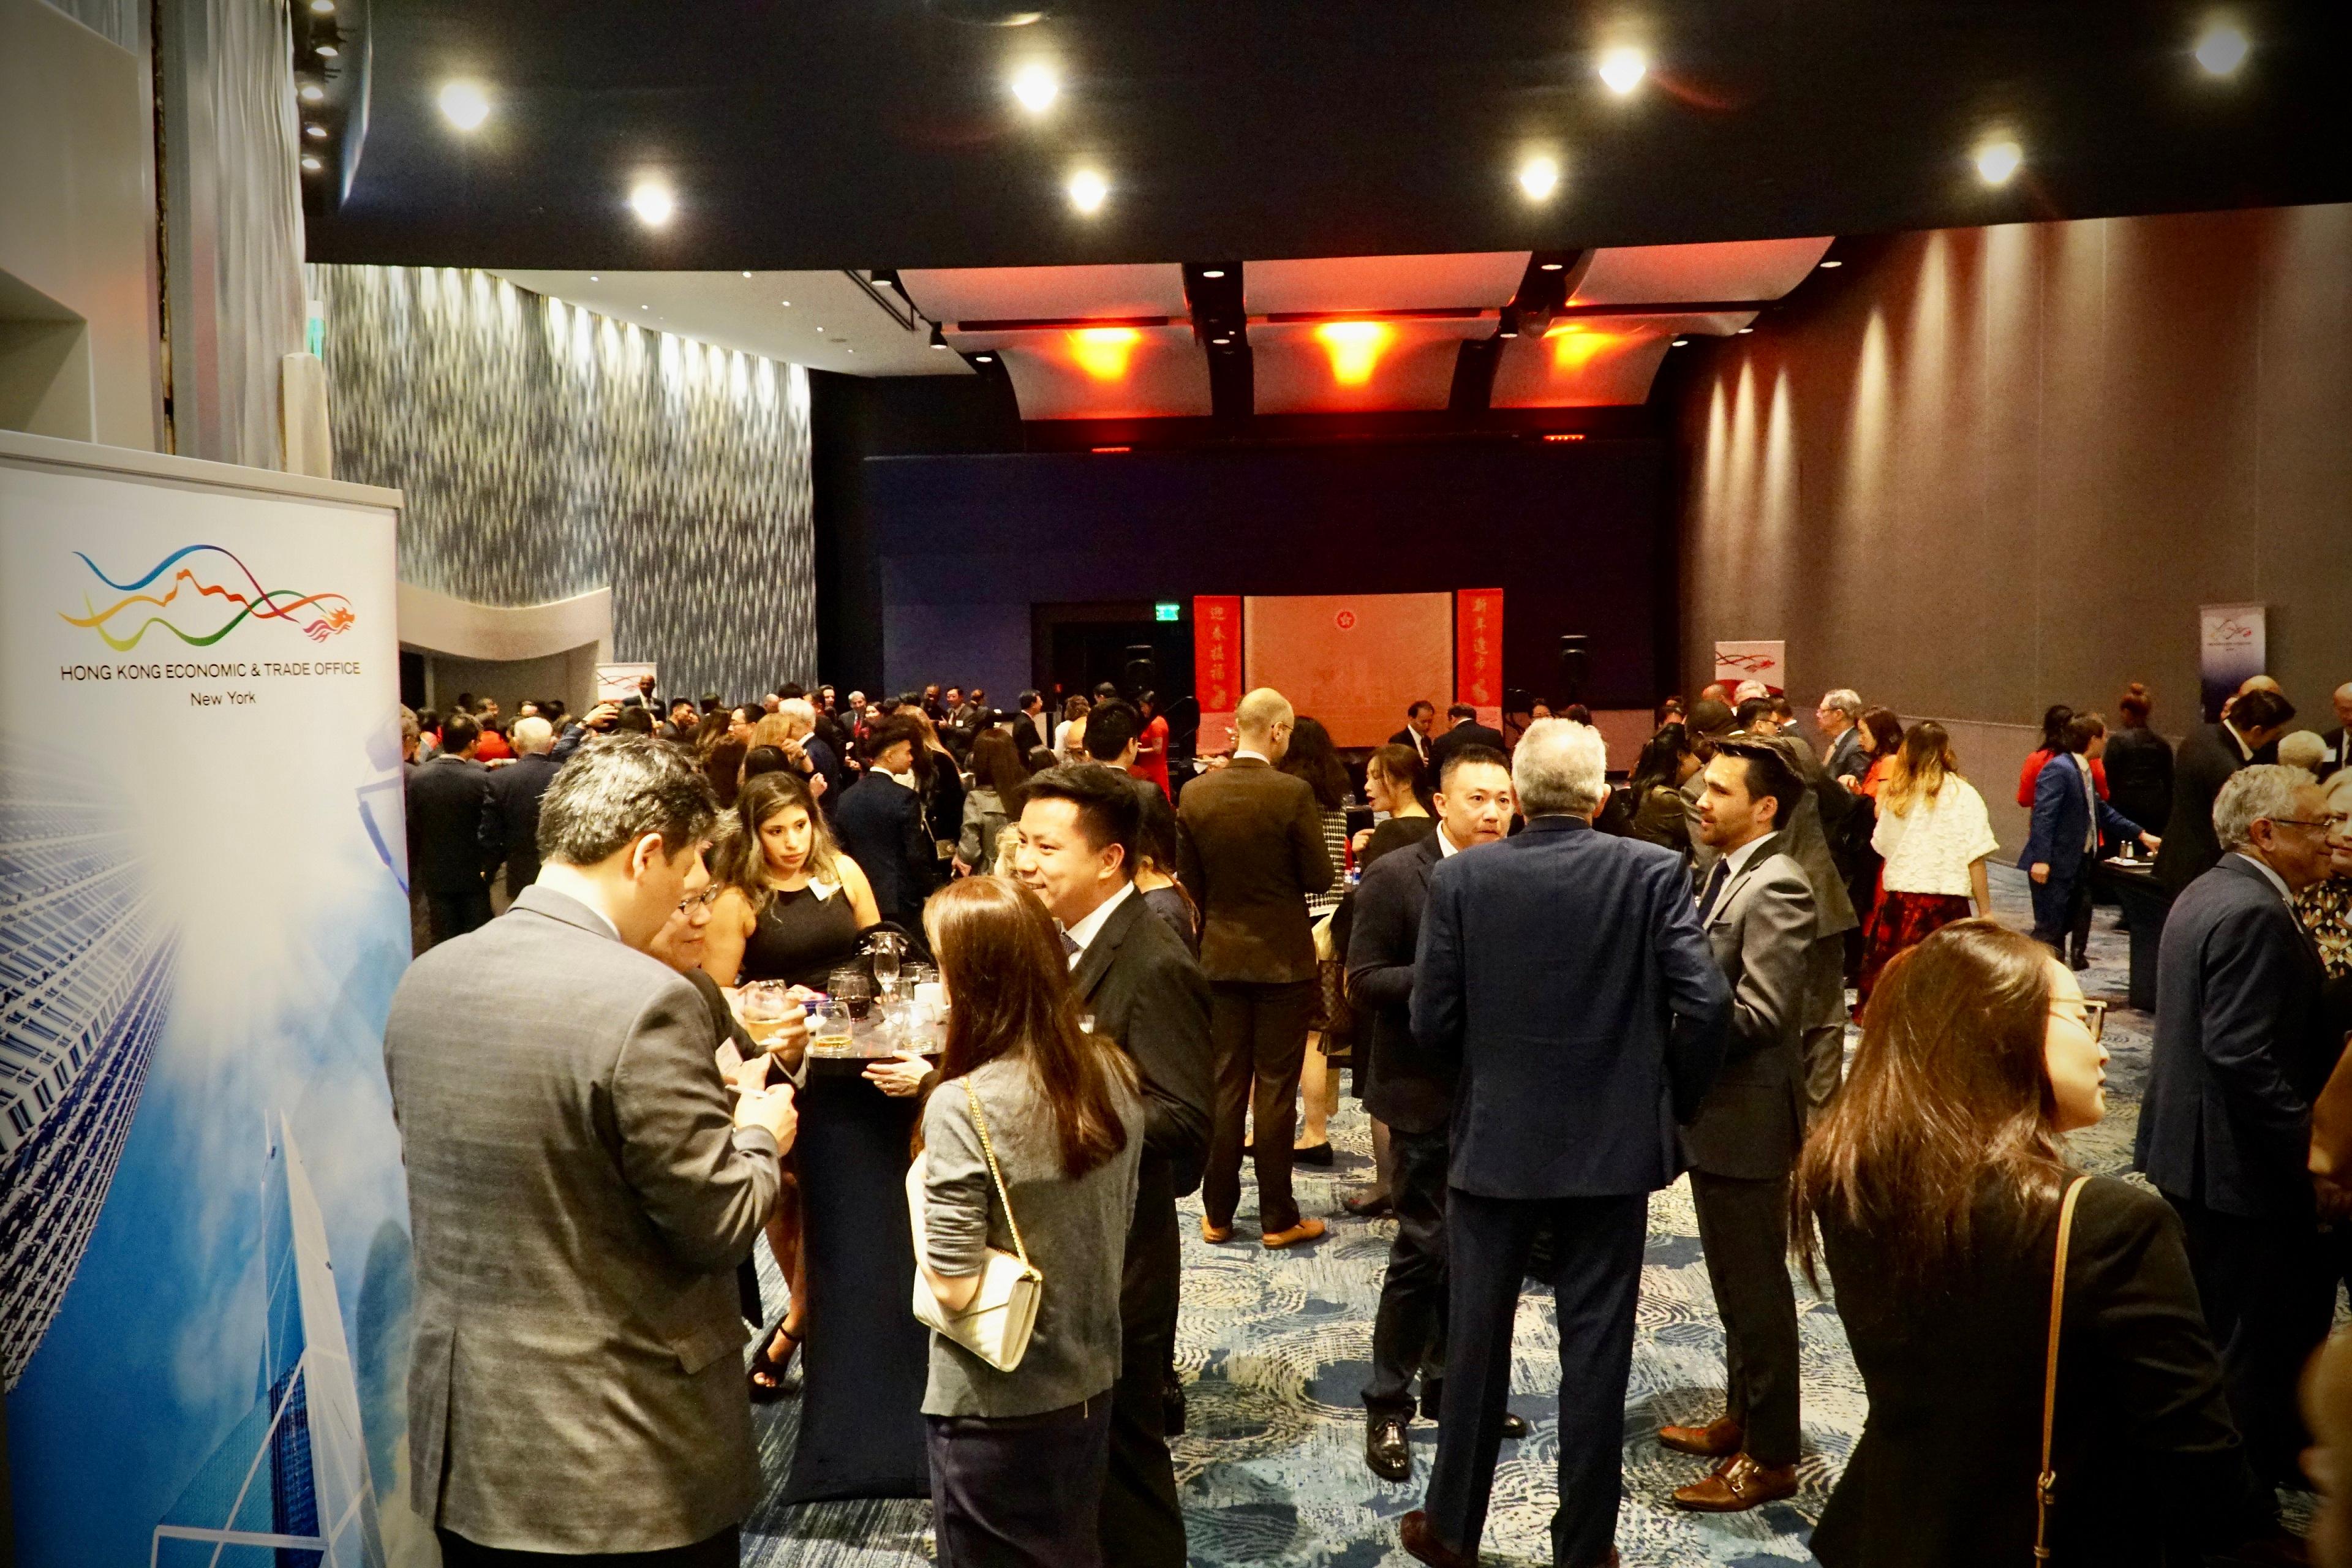 The Hong Kong Economic and Trade Office in New York hosted its spring reception in Atlanta on February 15 (Atlanta time) to welcome the Year of the Rabbit. The spring reception was joined by more than 200 guests from the academic, political and business, finance, innovation and technology, and legal sectors in Georgia.